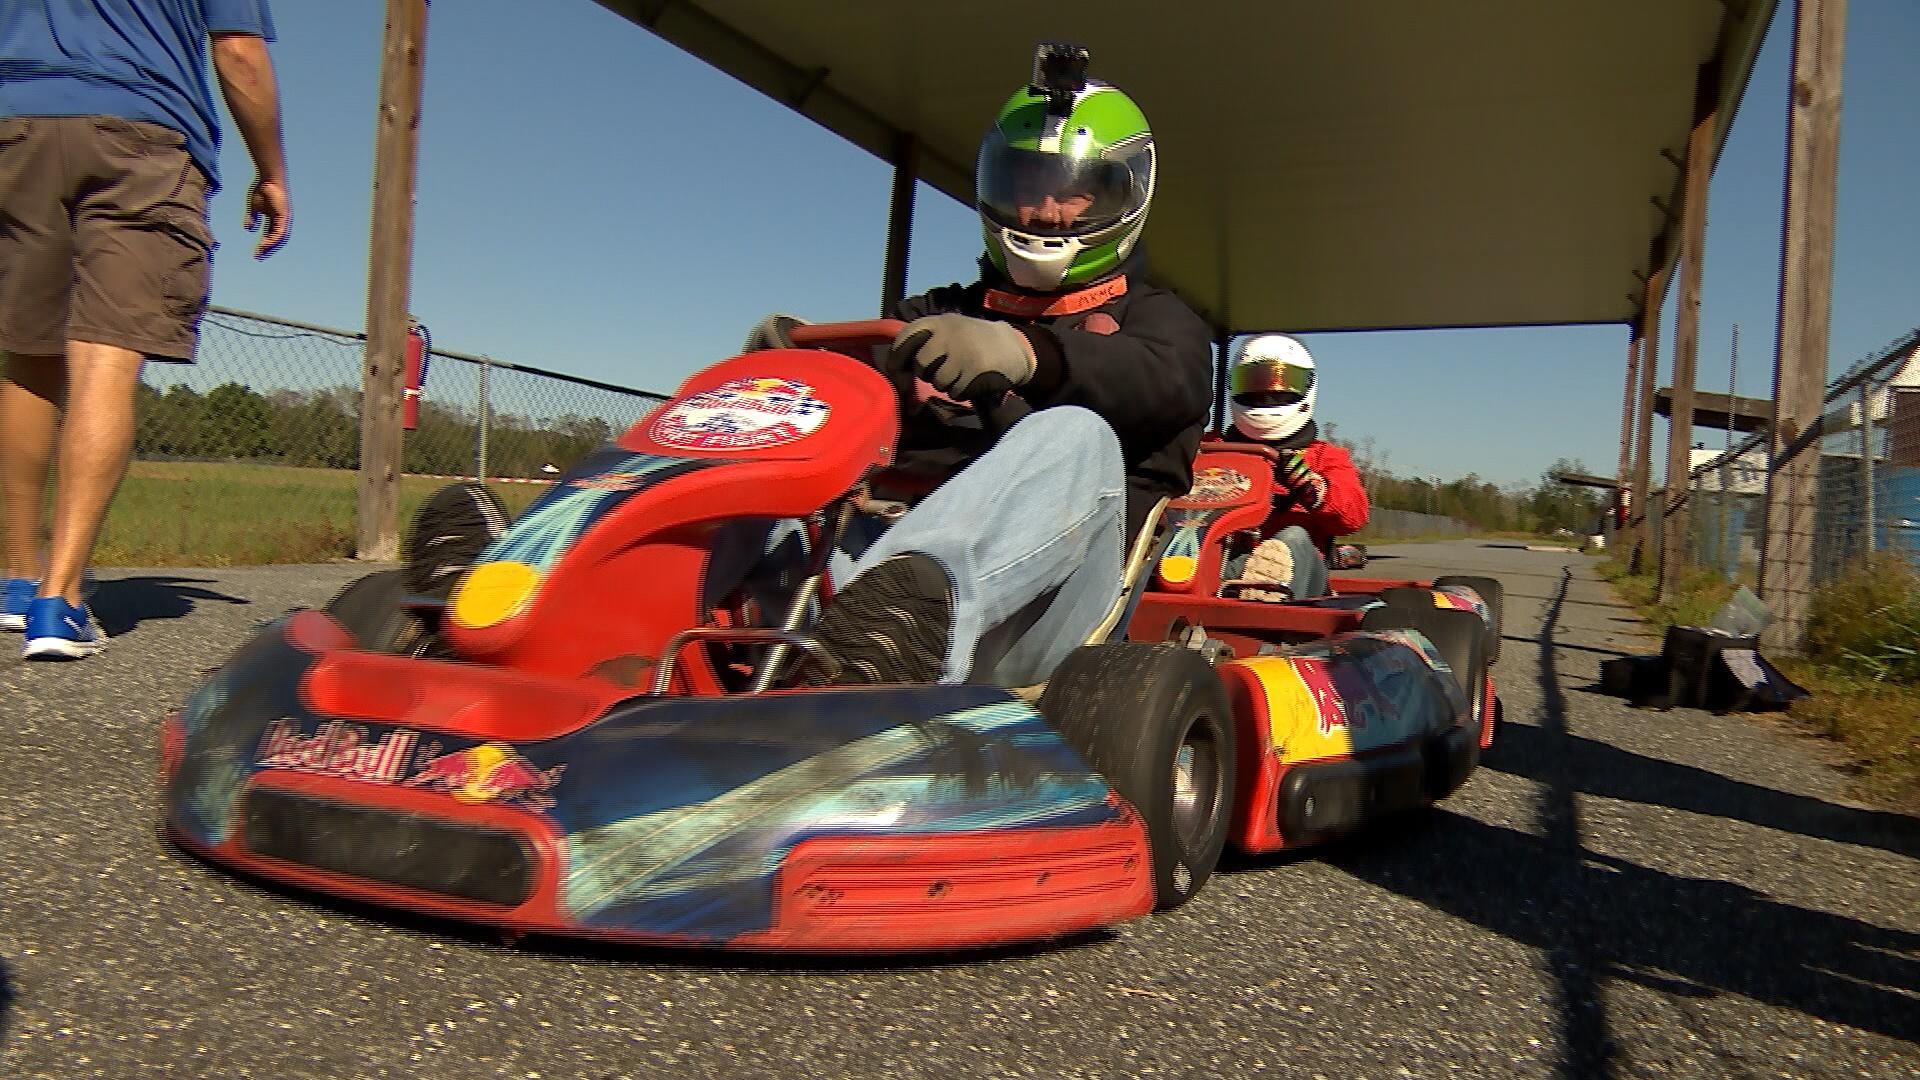 Monticello Karting and Motor Club